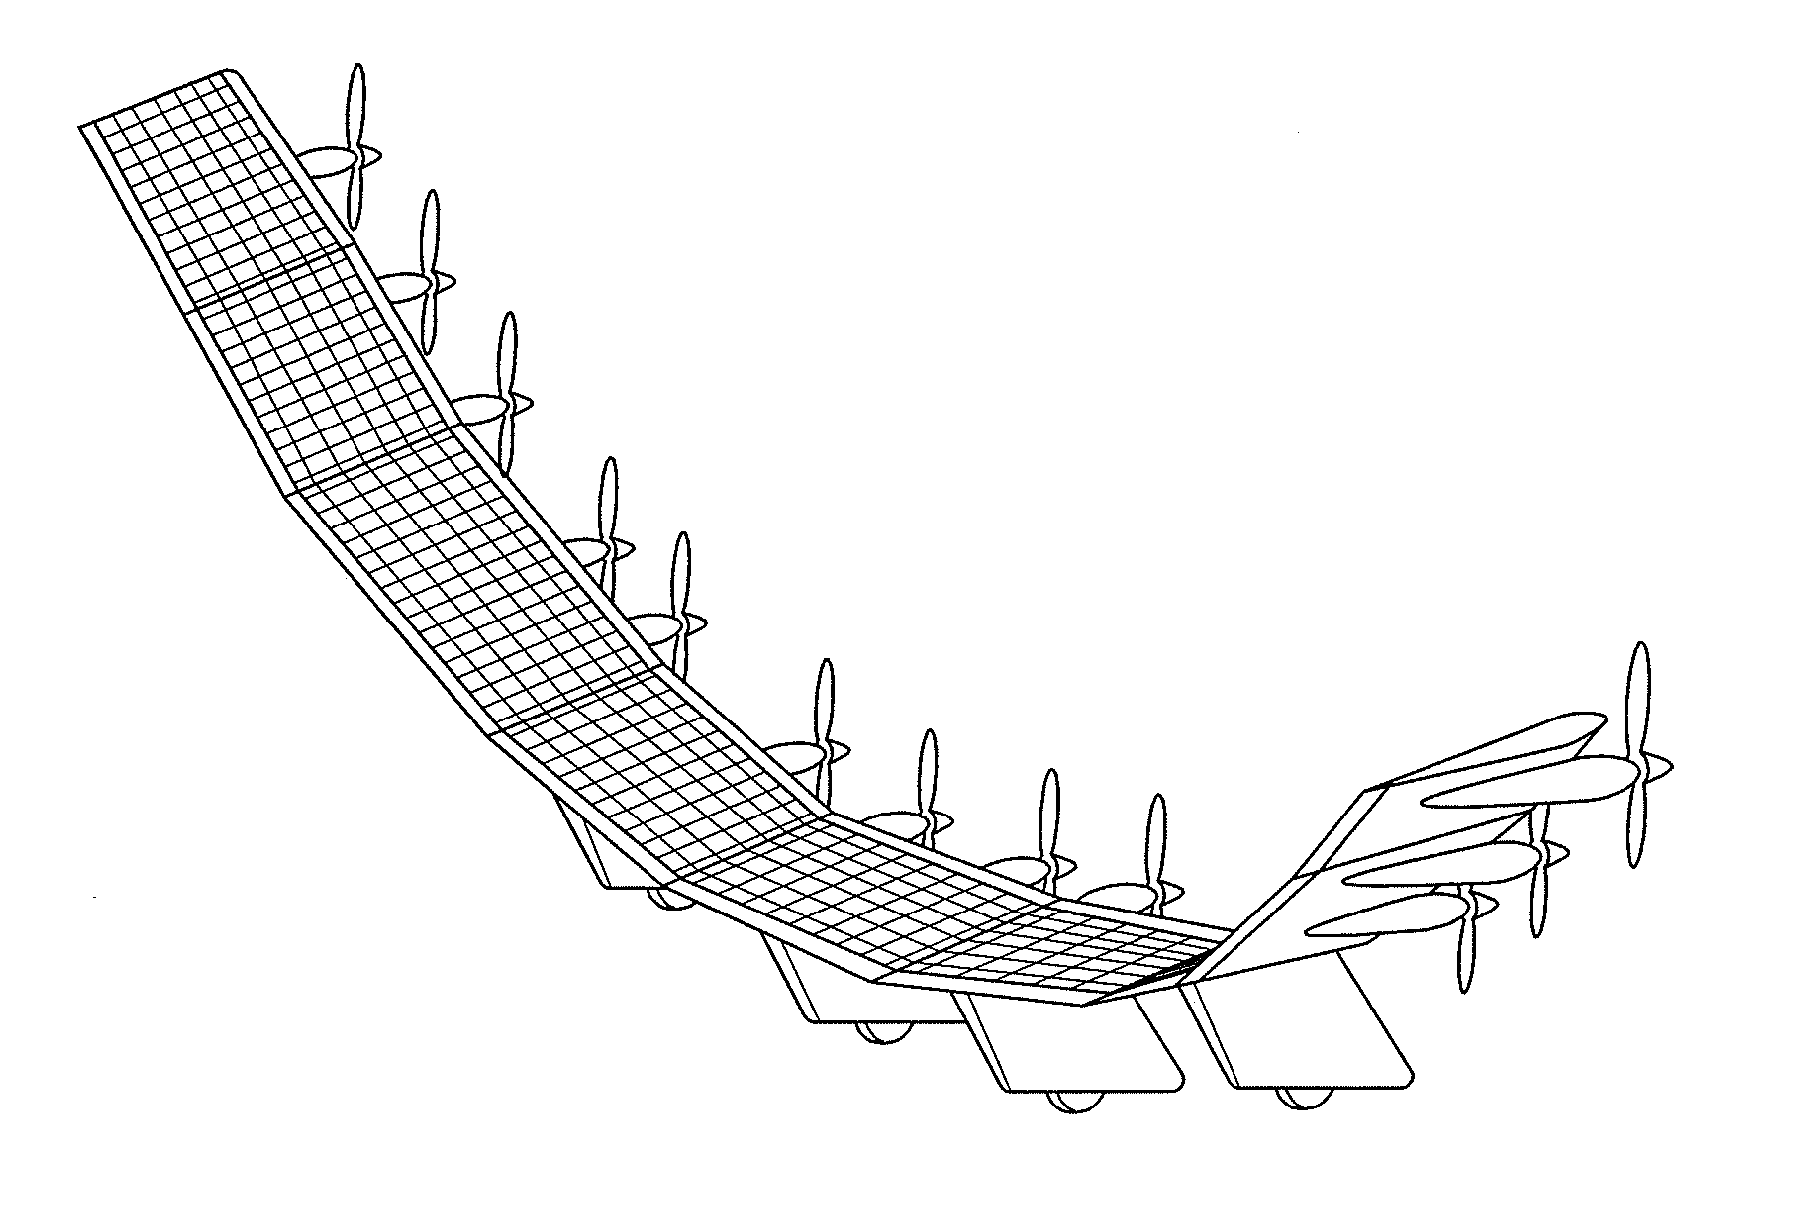 Method of operating a solar aircraft